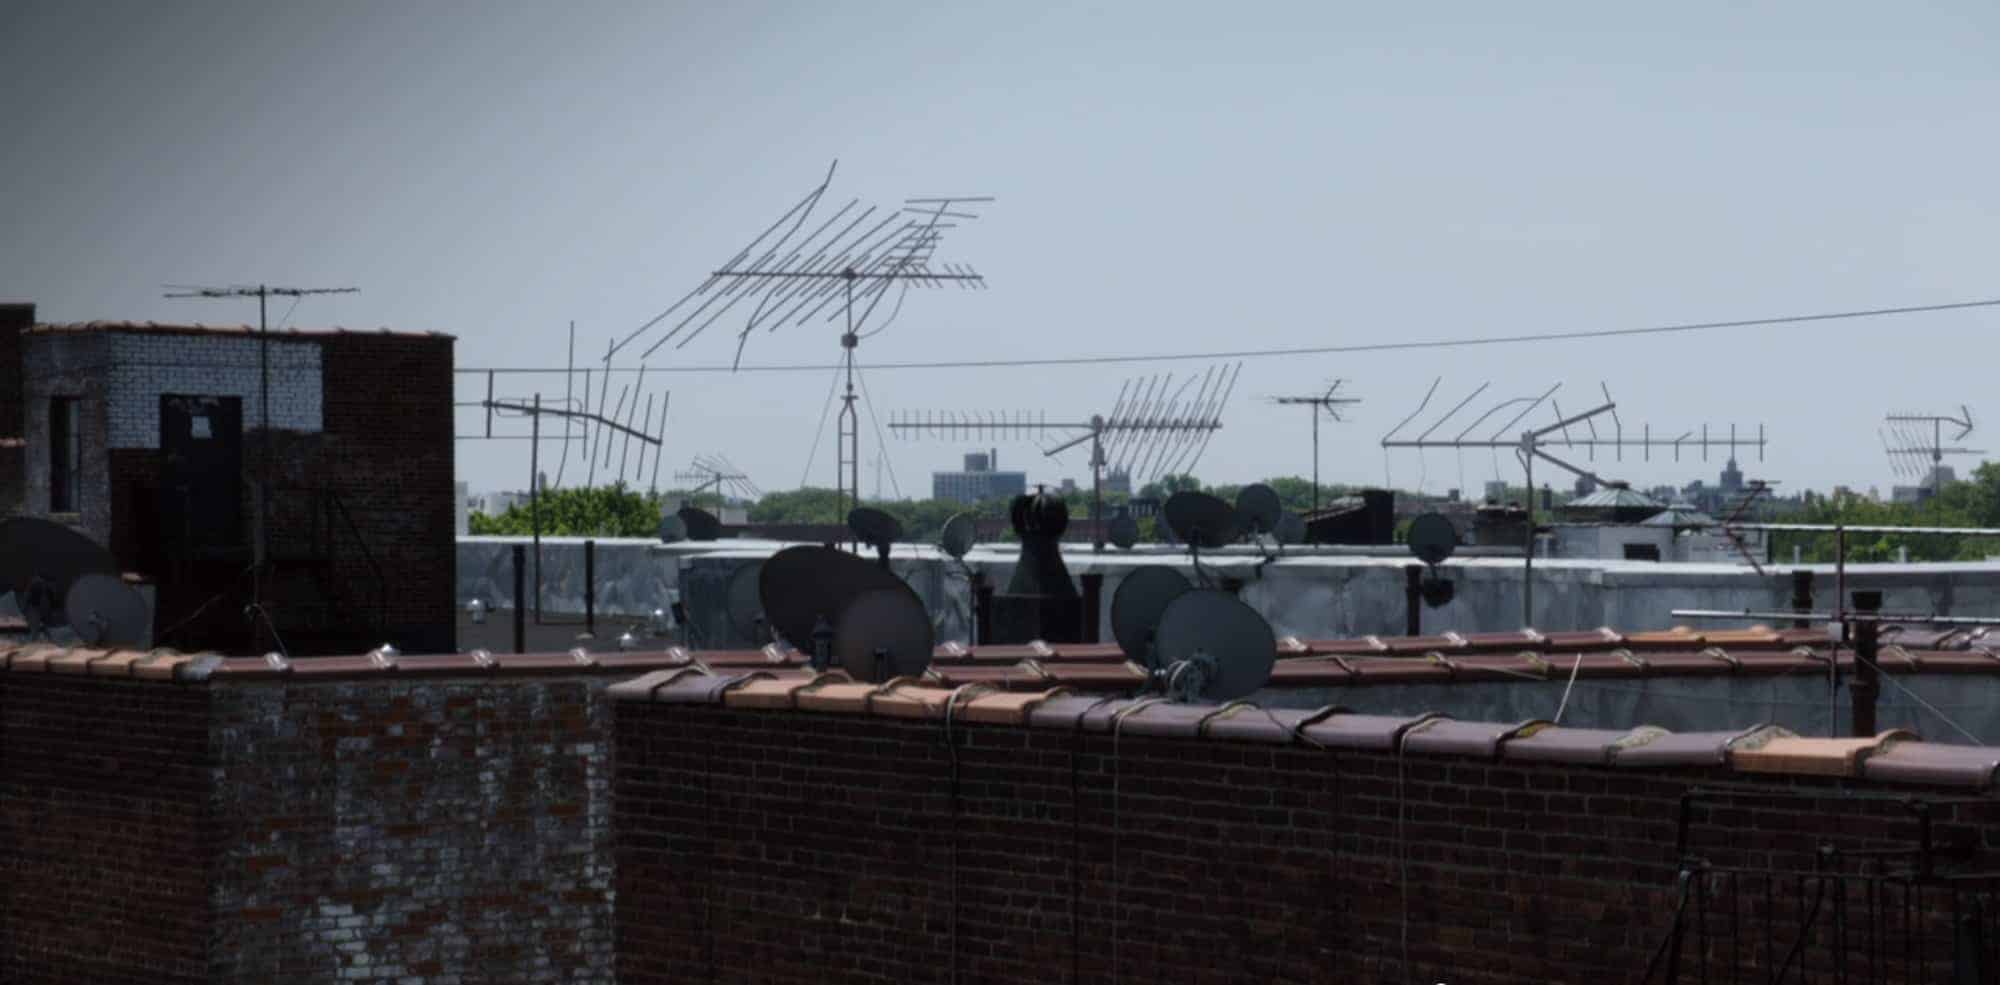 Rooftops in Brooklyn, NY with over-the-air television antennas installed.